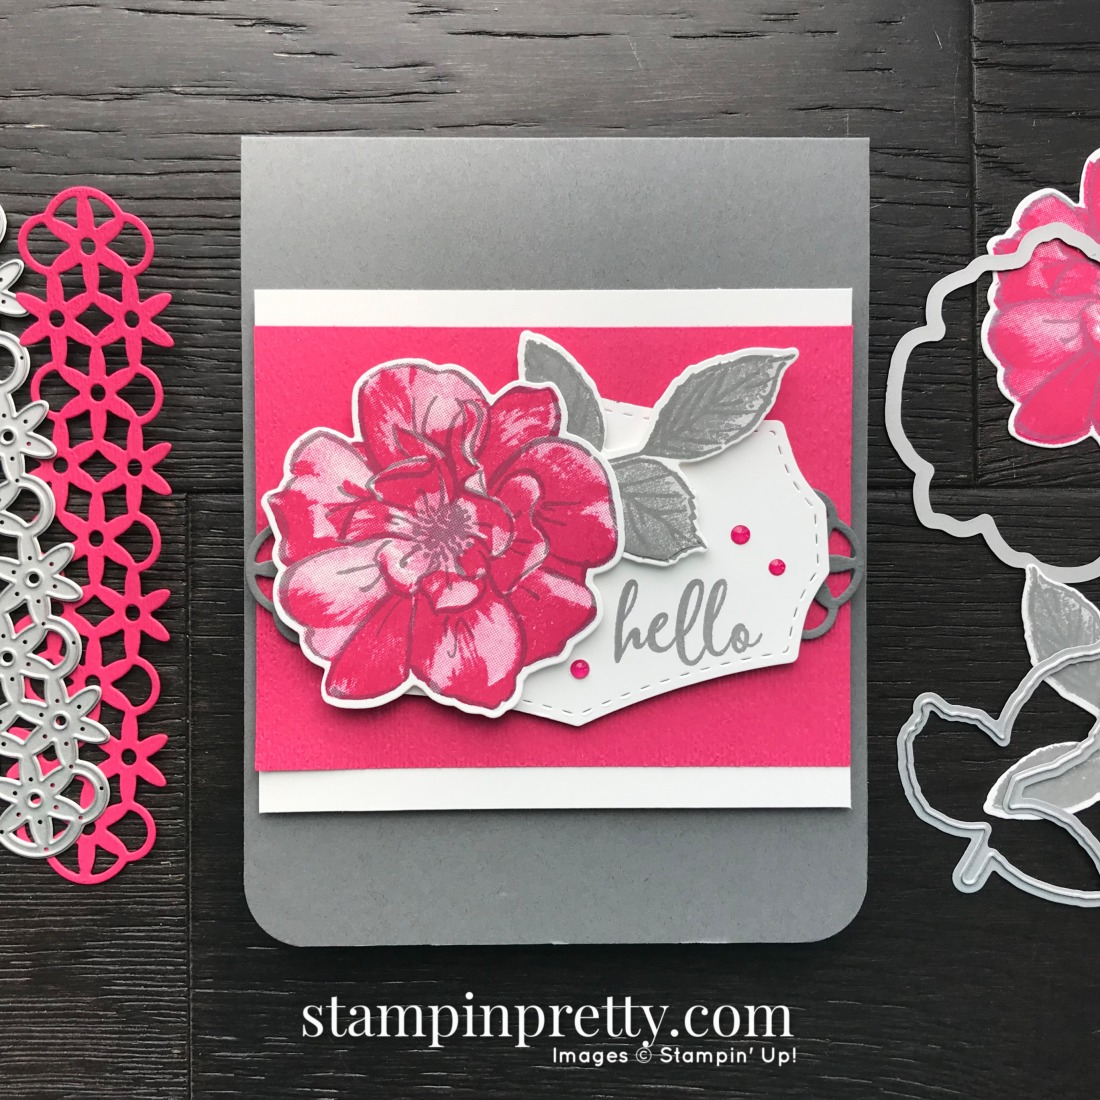 To A Wild Rose Stamp Set and Wild Rose Dies from Stampin' Up! Card by Mary Fish, Stampin' Pretty